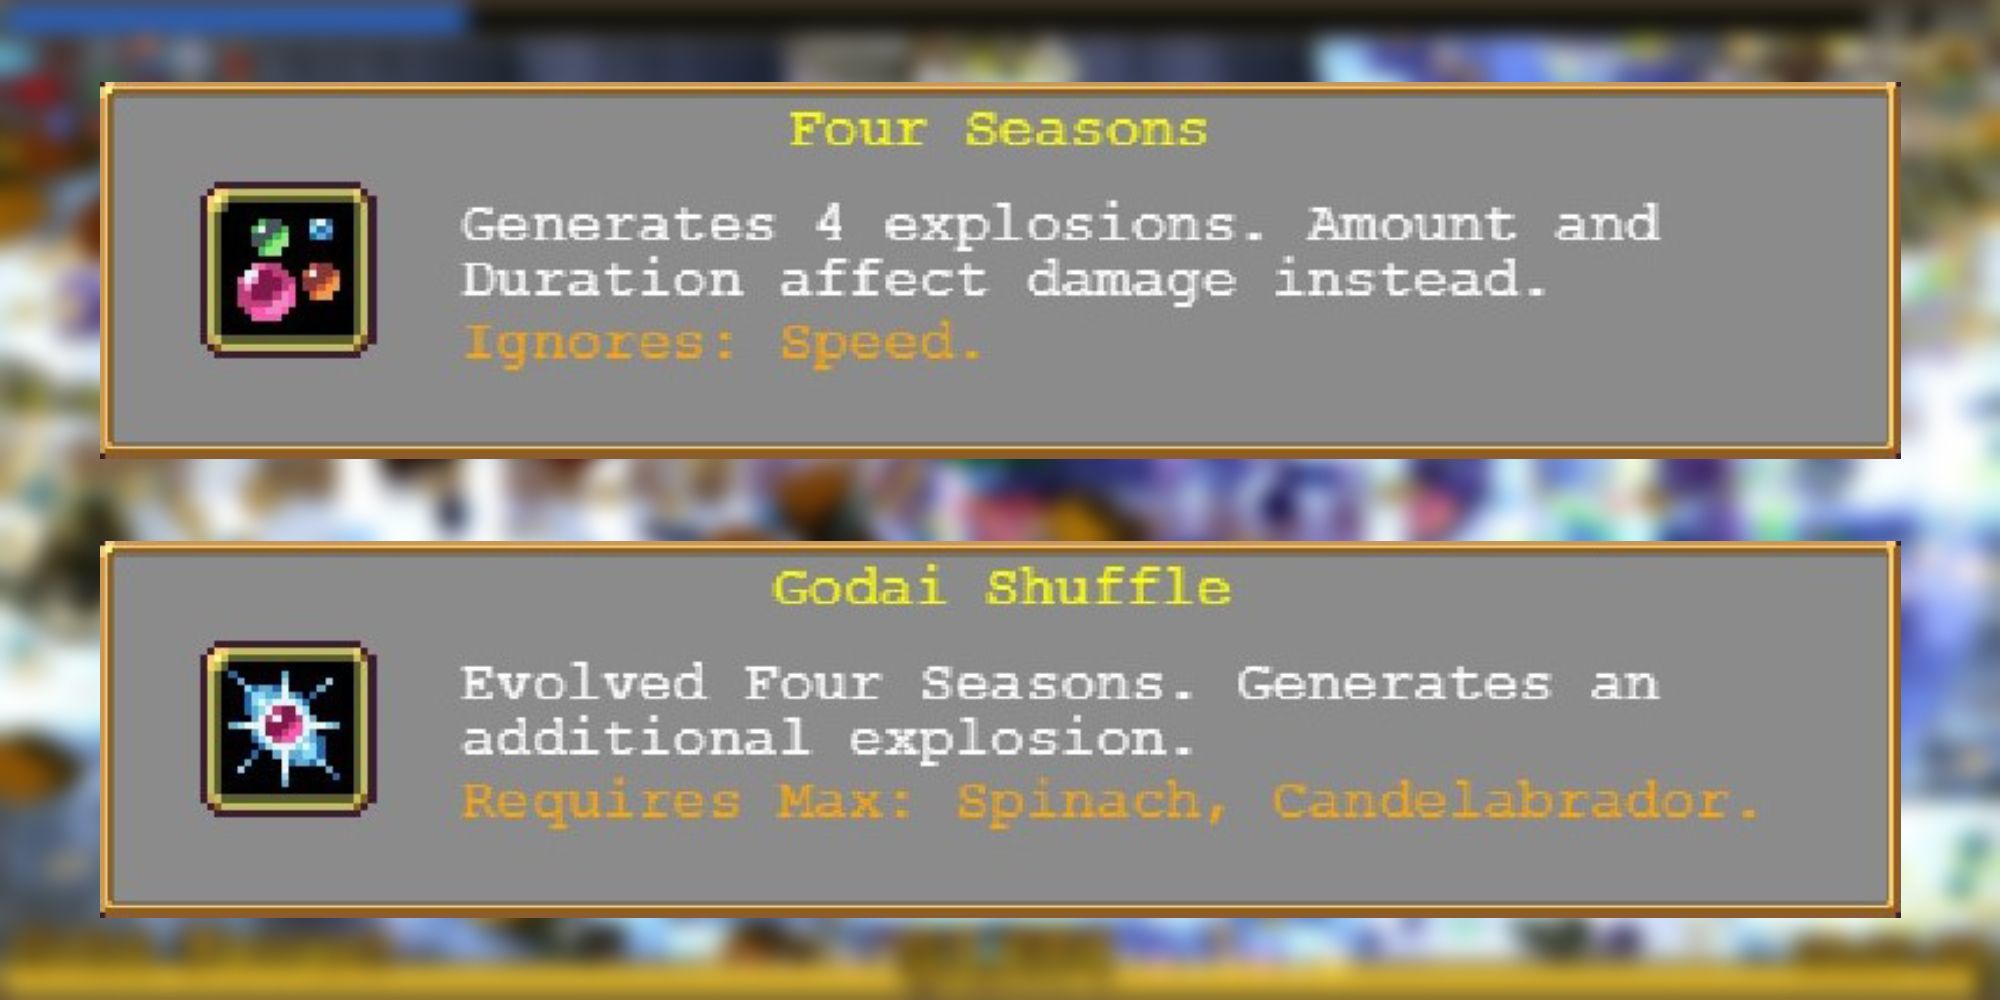 Information on the weapons Four Seasons and Godai Shuffle from Vampire Survivors.